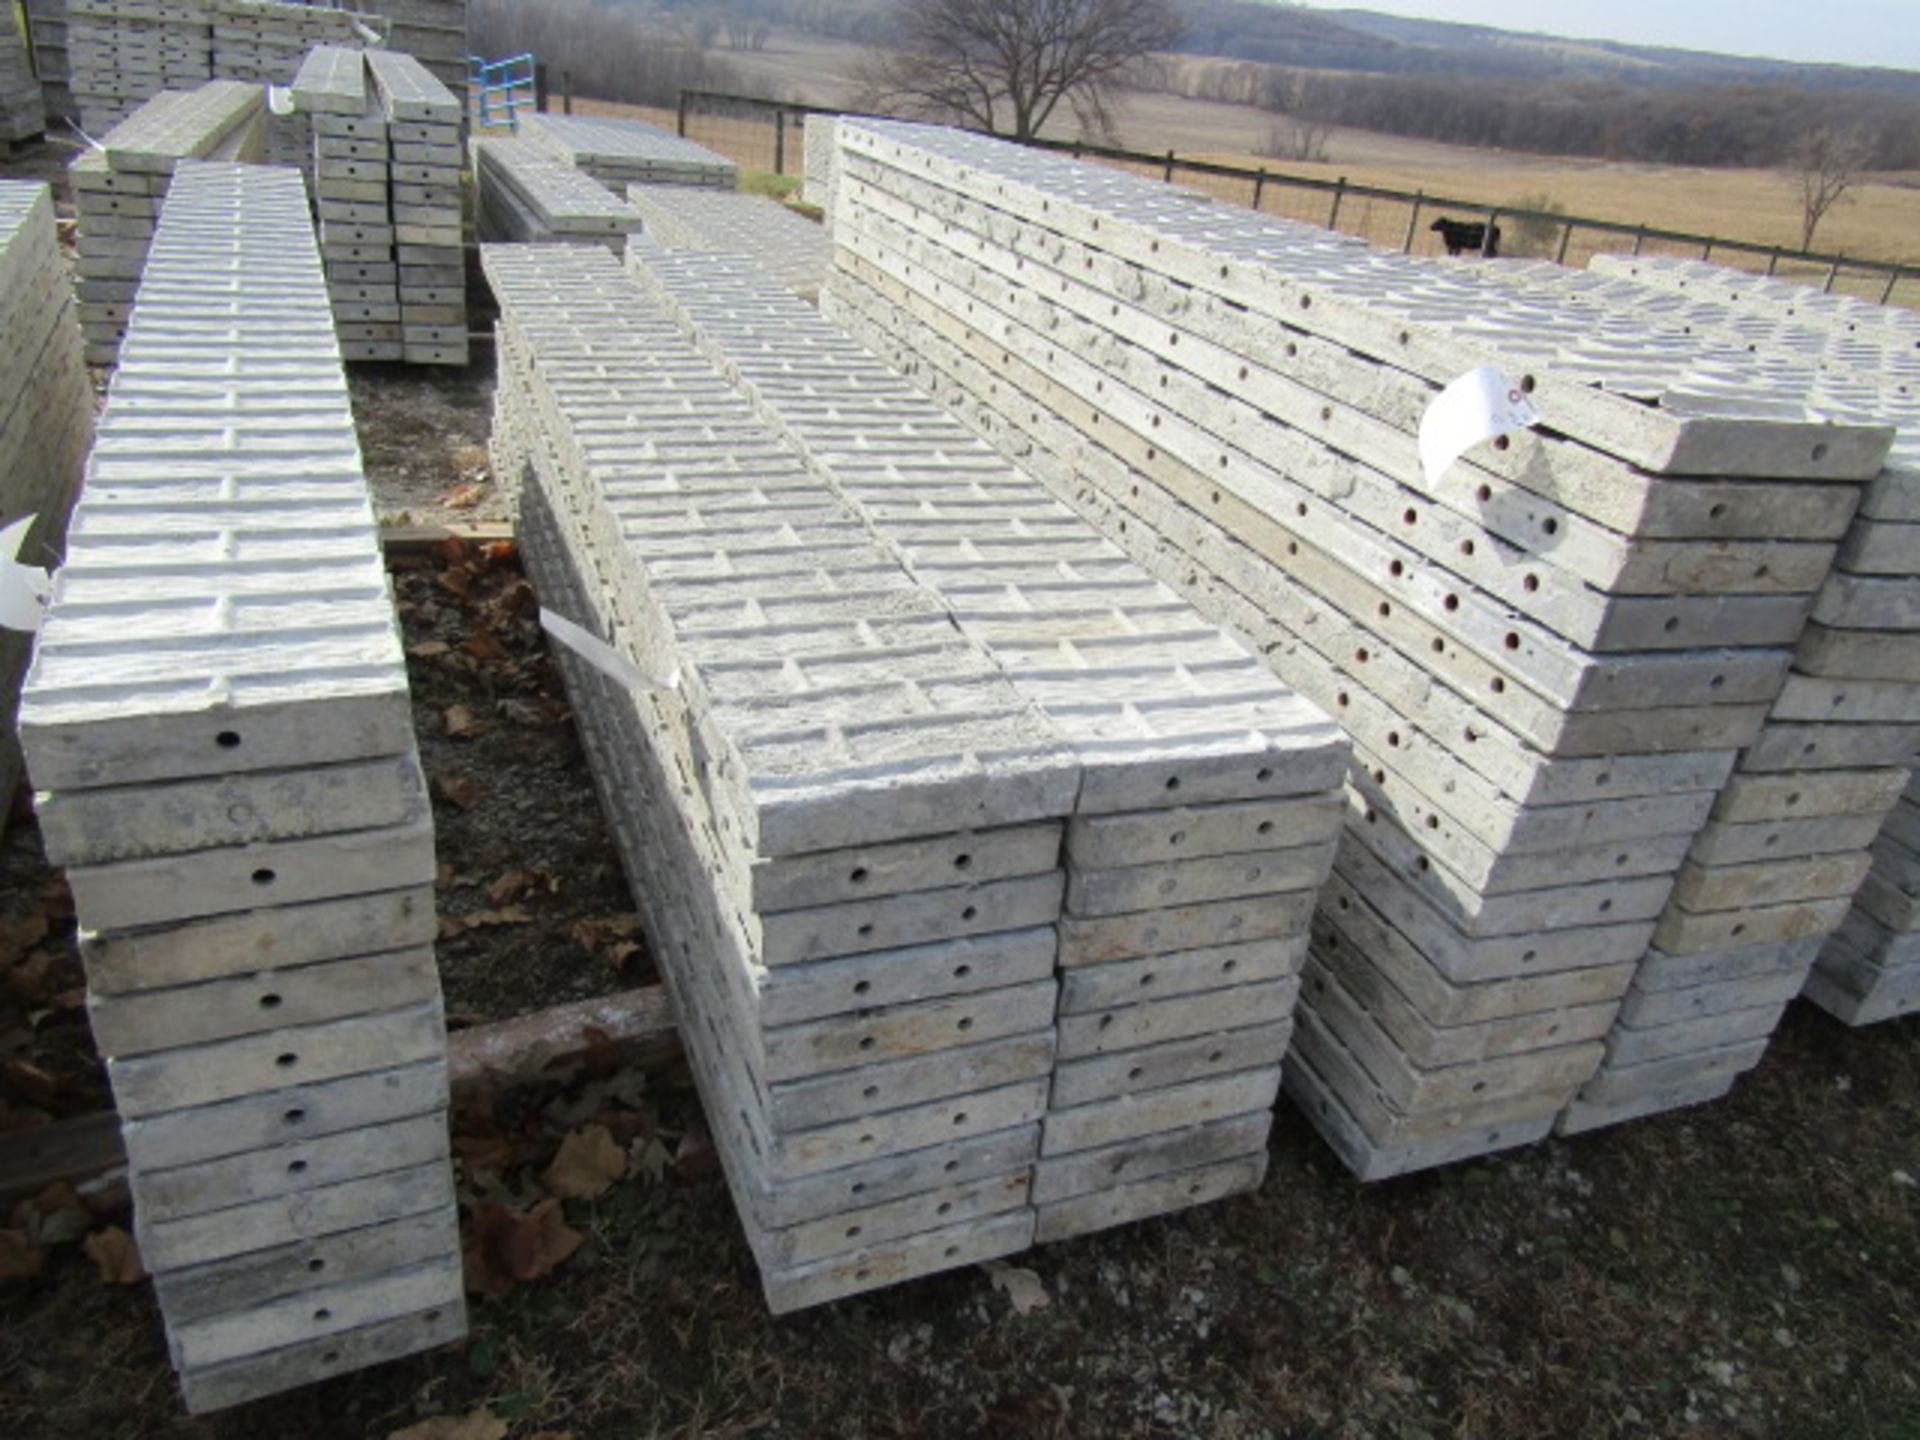 (10) 12" x 9' Precise Concrete Forms, Textured Brick 8" Hole Pattern, Located in Winterset, IA